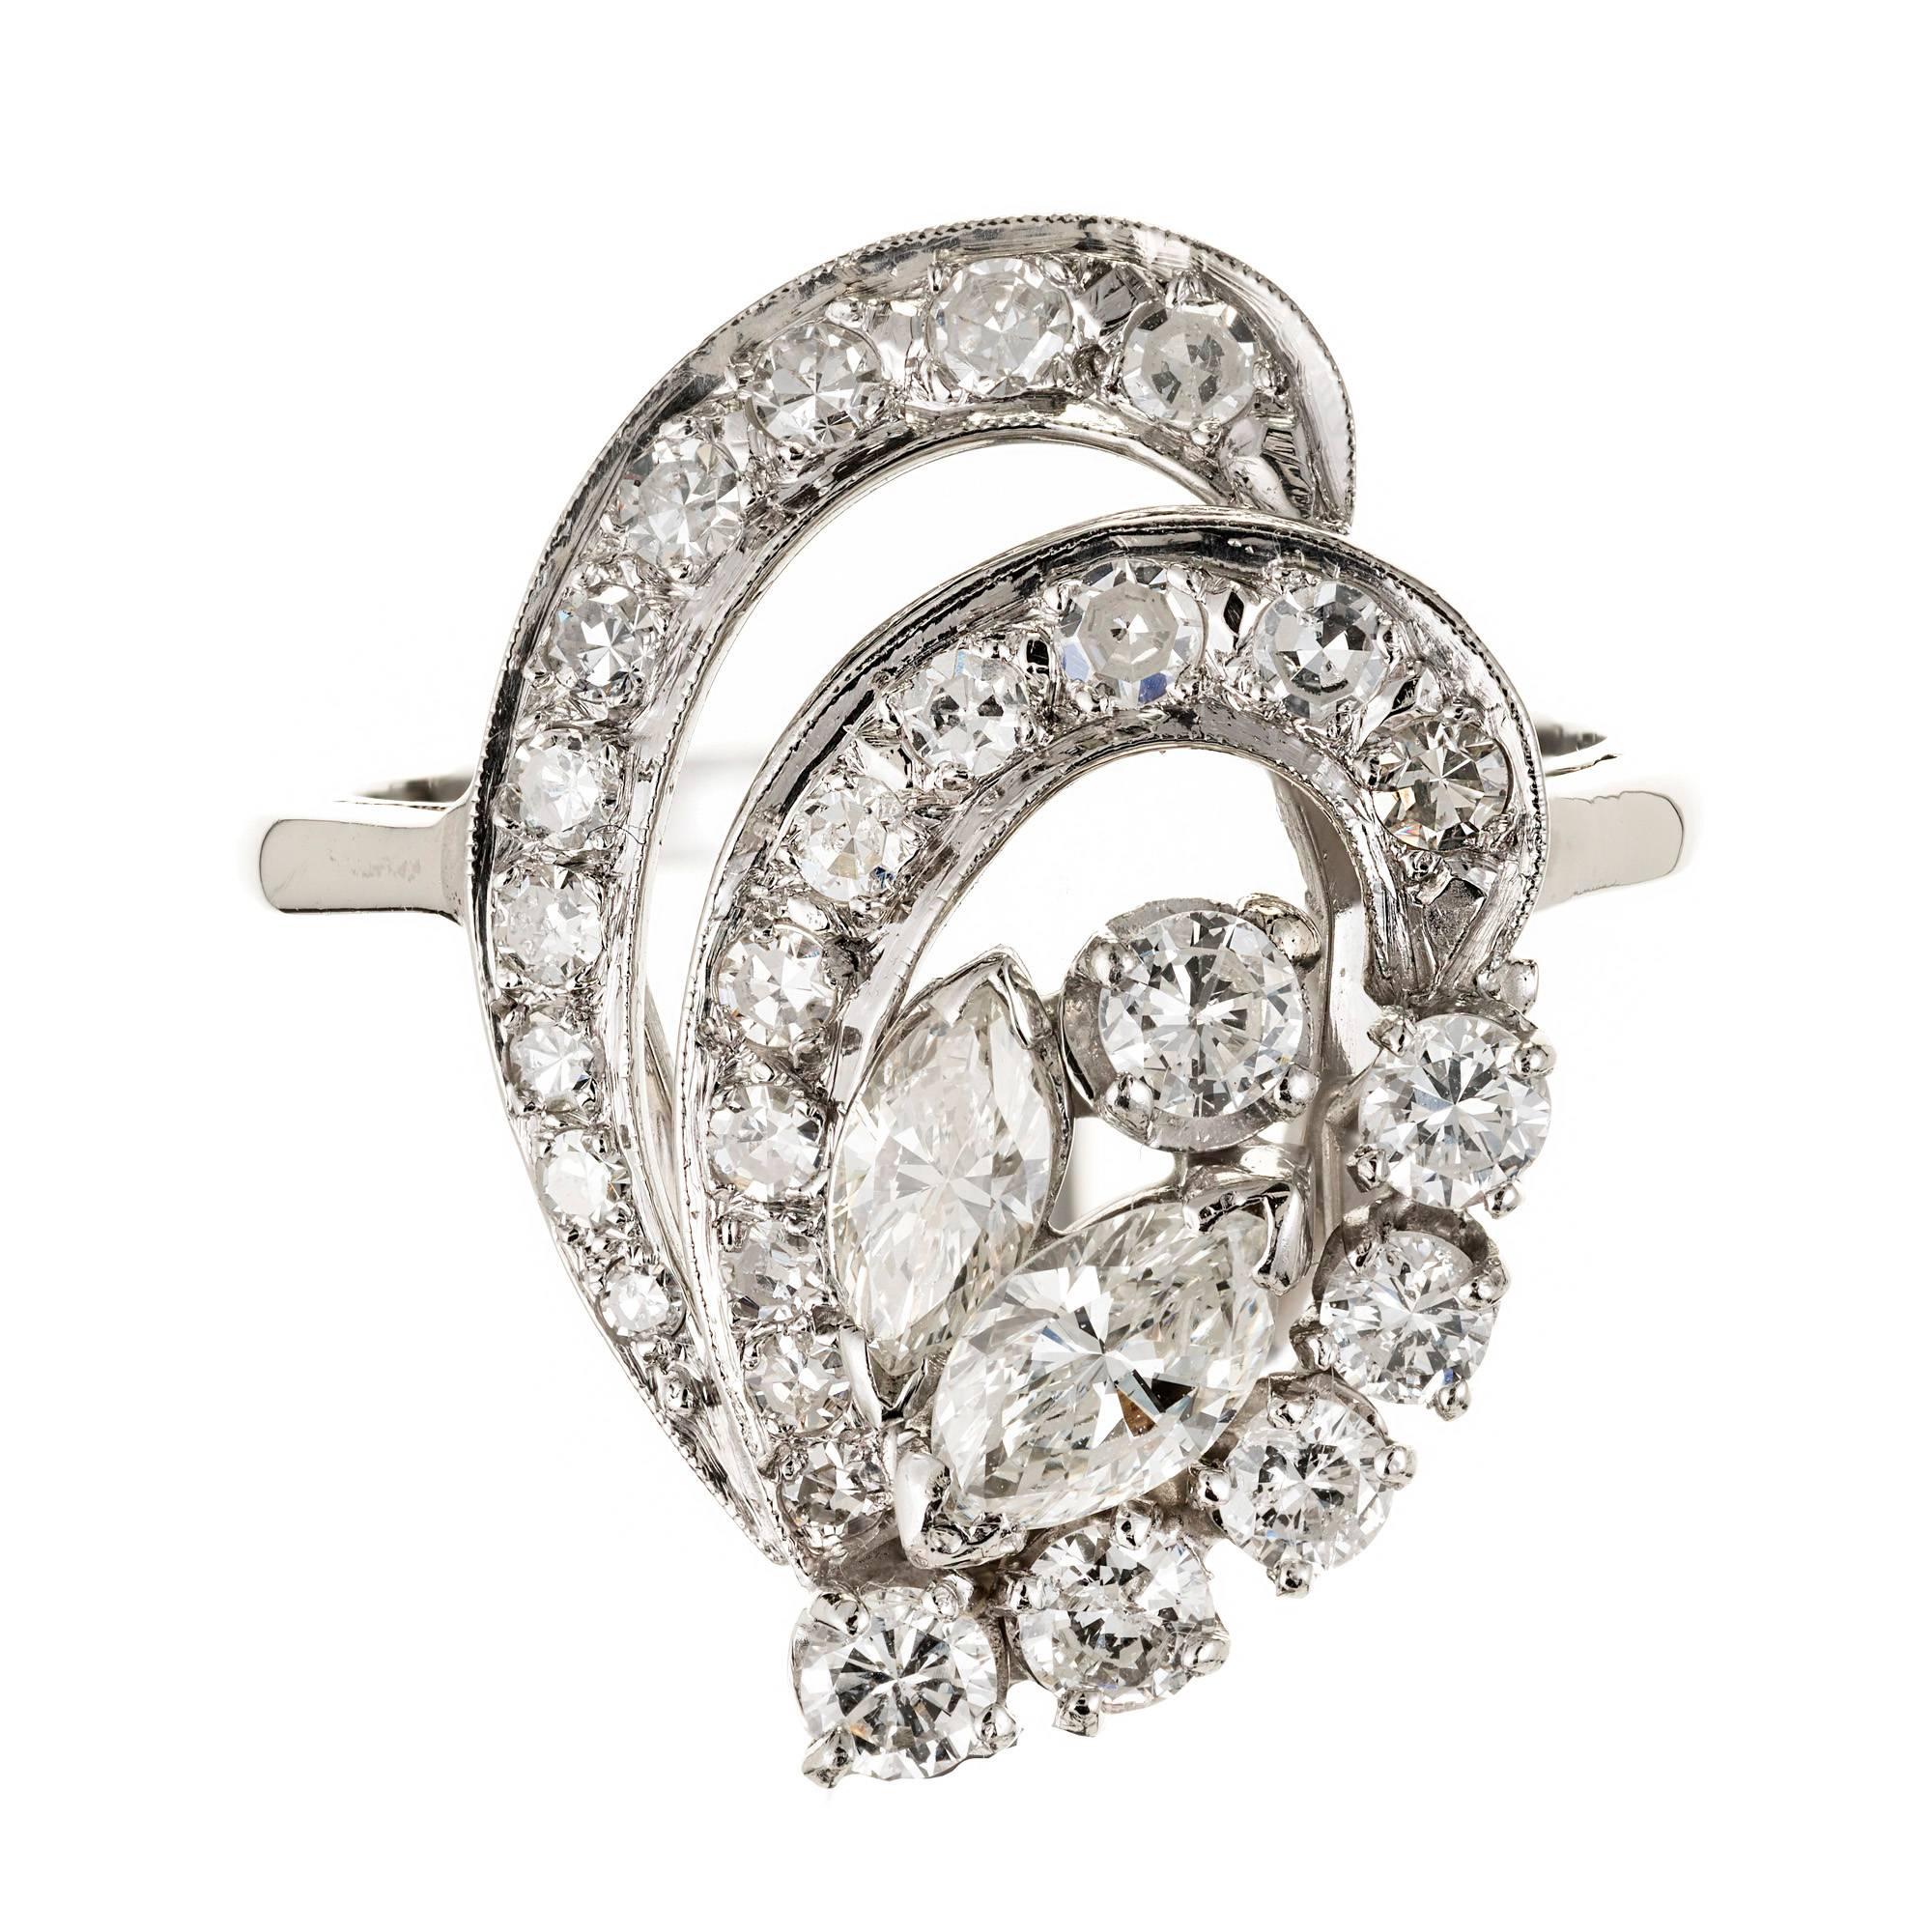 Vintage 1950s swirl Platinum ring with bright sparkly Marquise and round Diamonds. Mid-century open work ring.

2 Marquise Diamonds, approx. total weight .38cts, VS, 6 x 3.3 x 2.2mm
6 round full cut Diamonds, approx. total weight .40cts, H – I, VS –